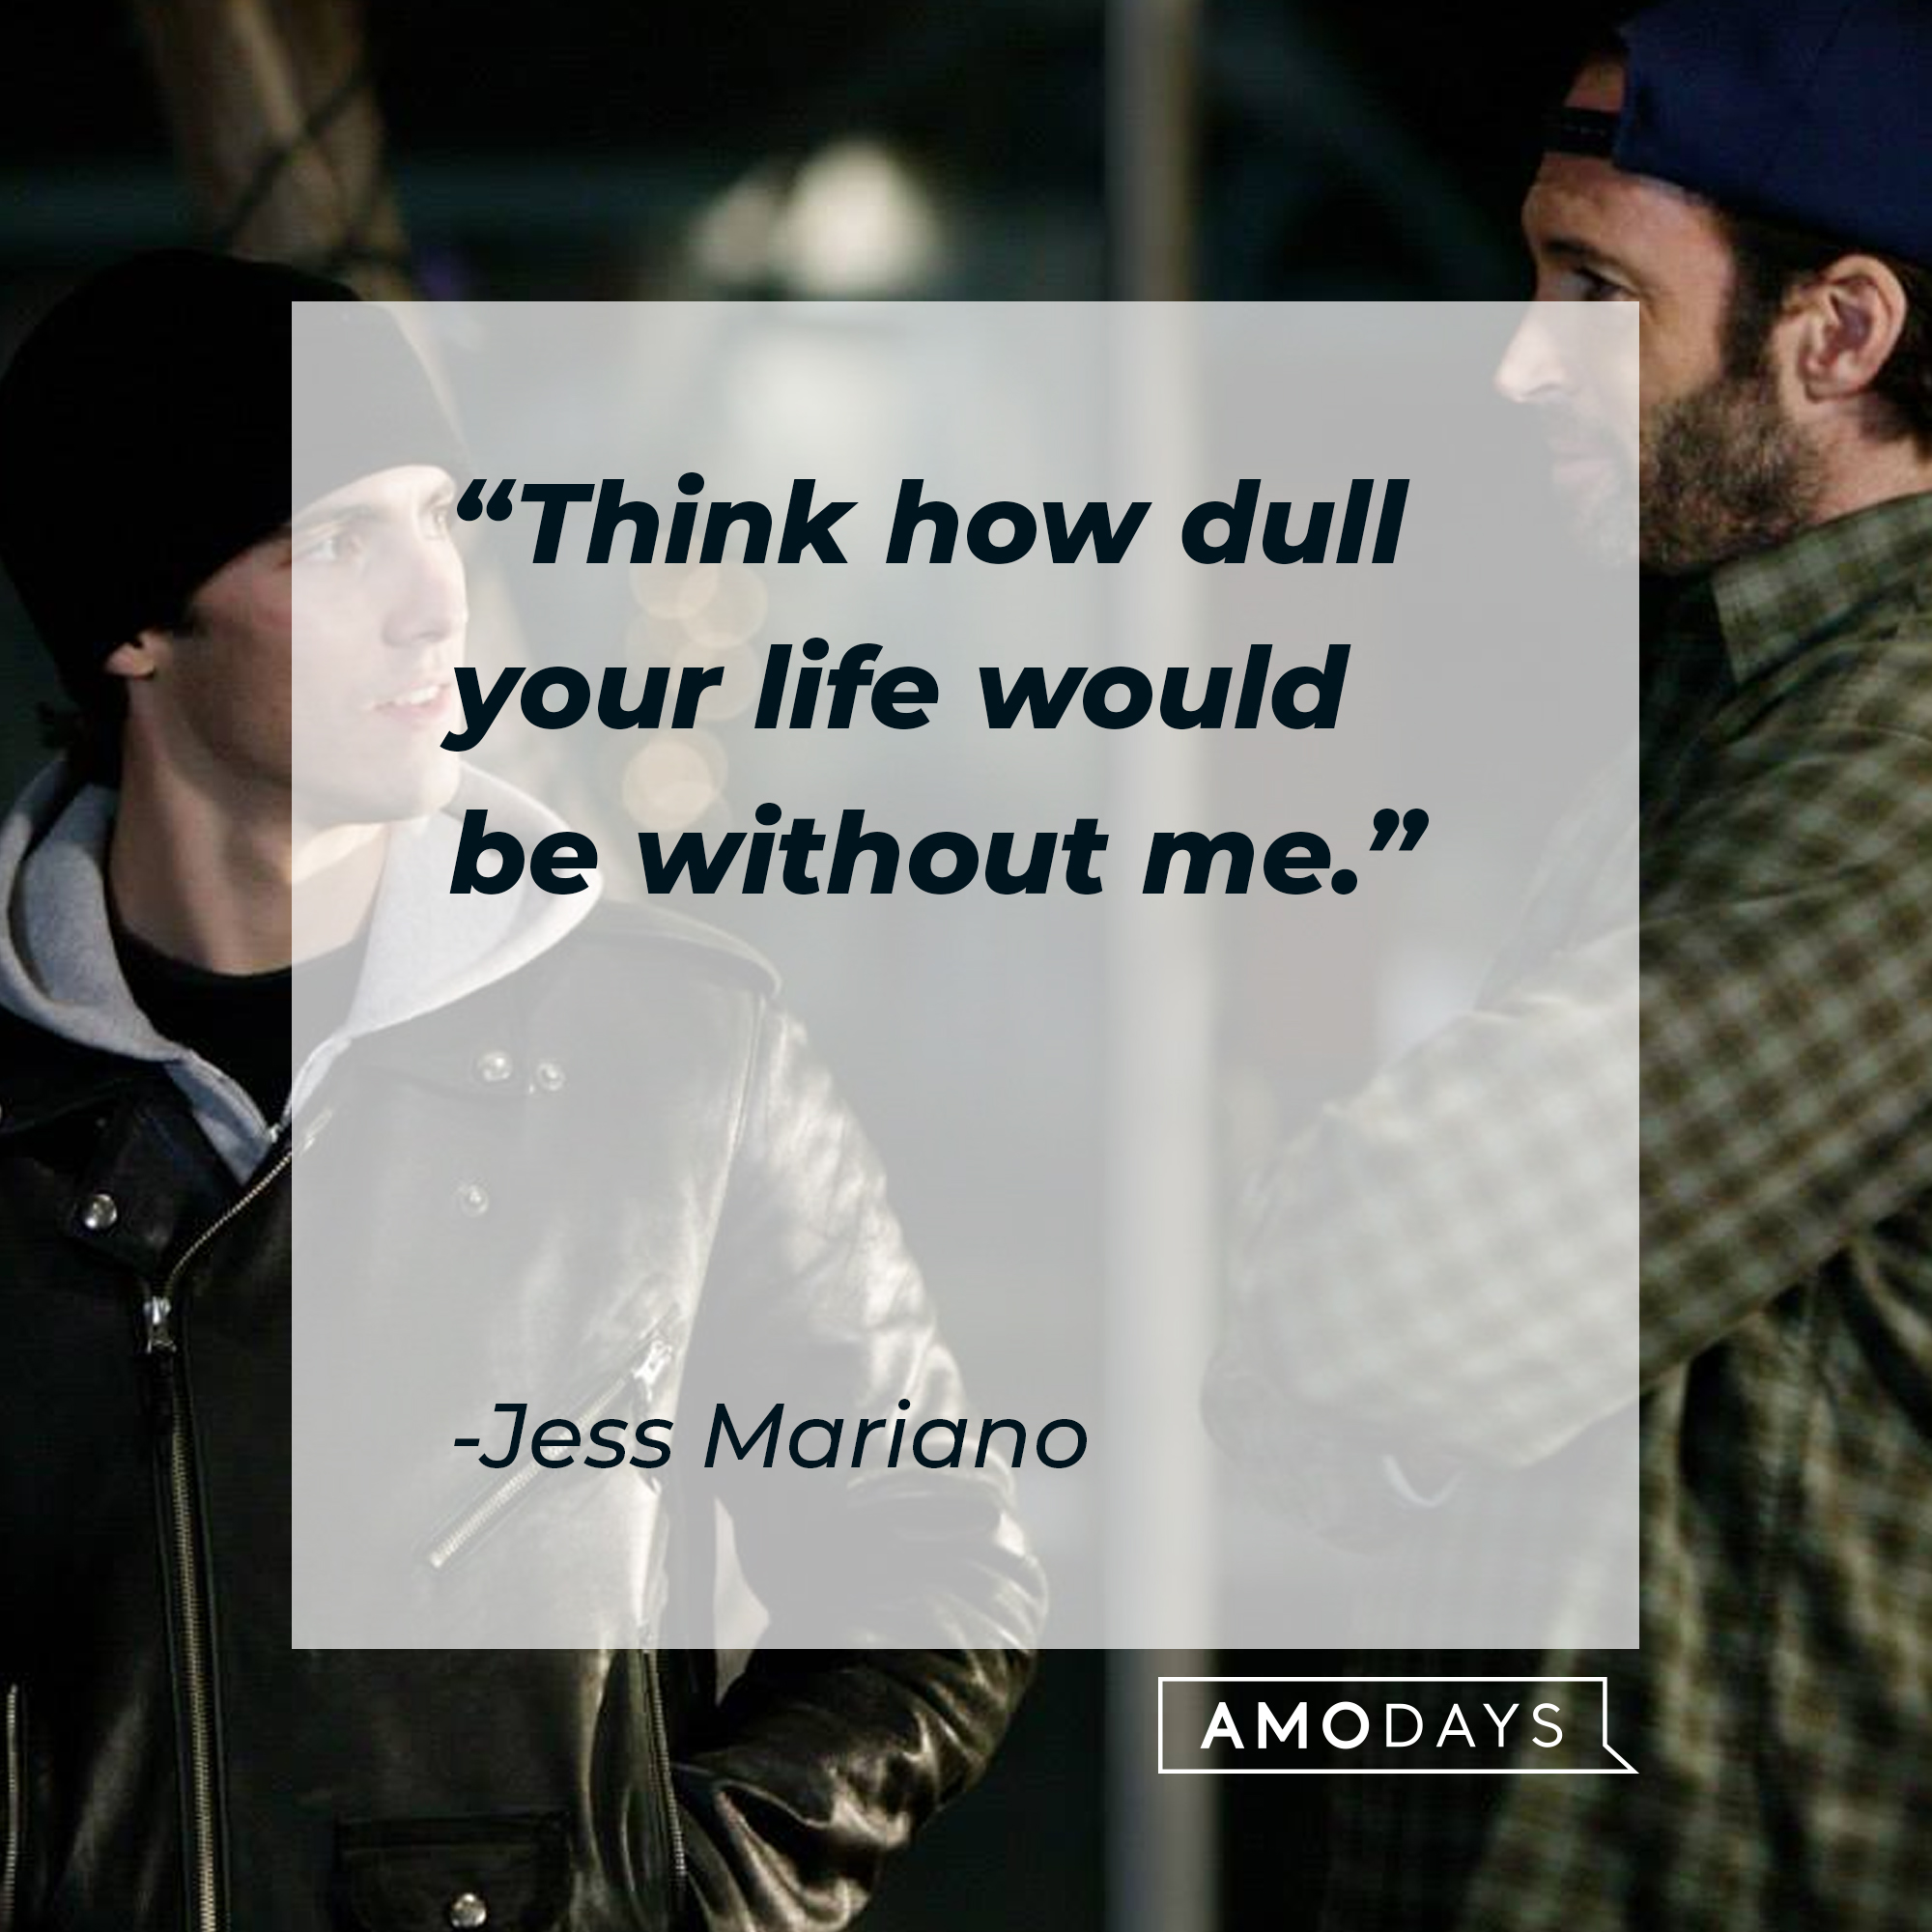 Luke Danes and Jess Mariano, with Mariano’s quote: "Think how dull your life would be without me." | Source: facebook.com/GilmoreGirls